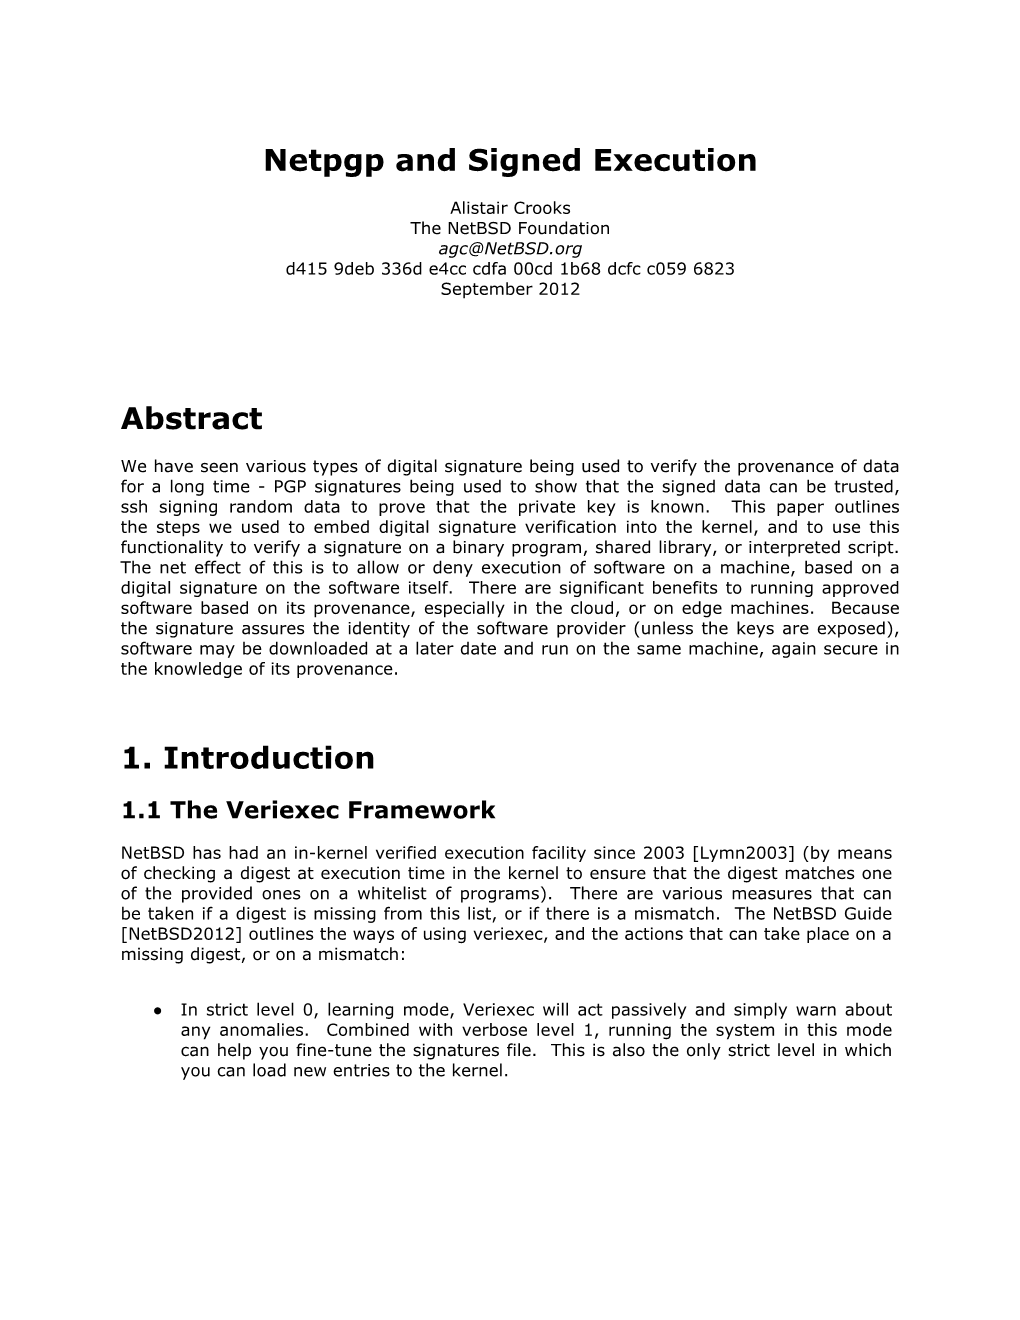 Netpgp and Signed Execution Abstract 1. Introduction